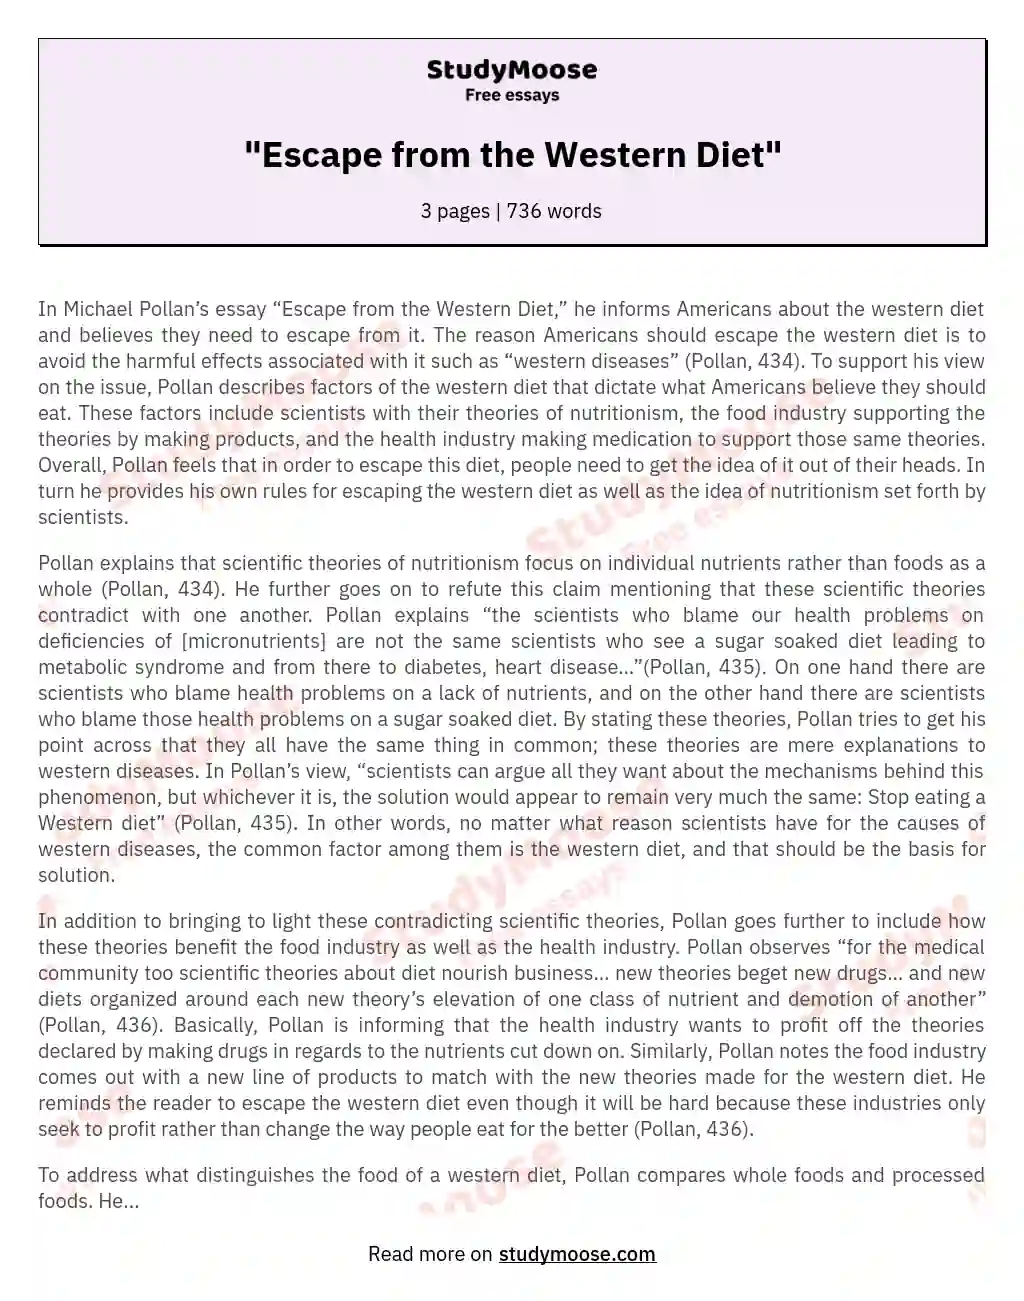 "Escape from the Western Diet" essay